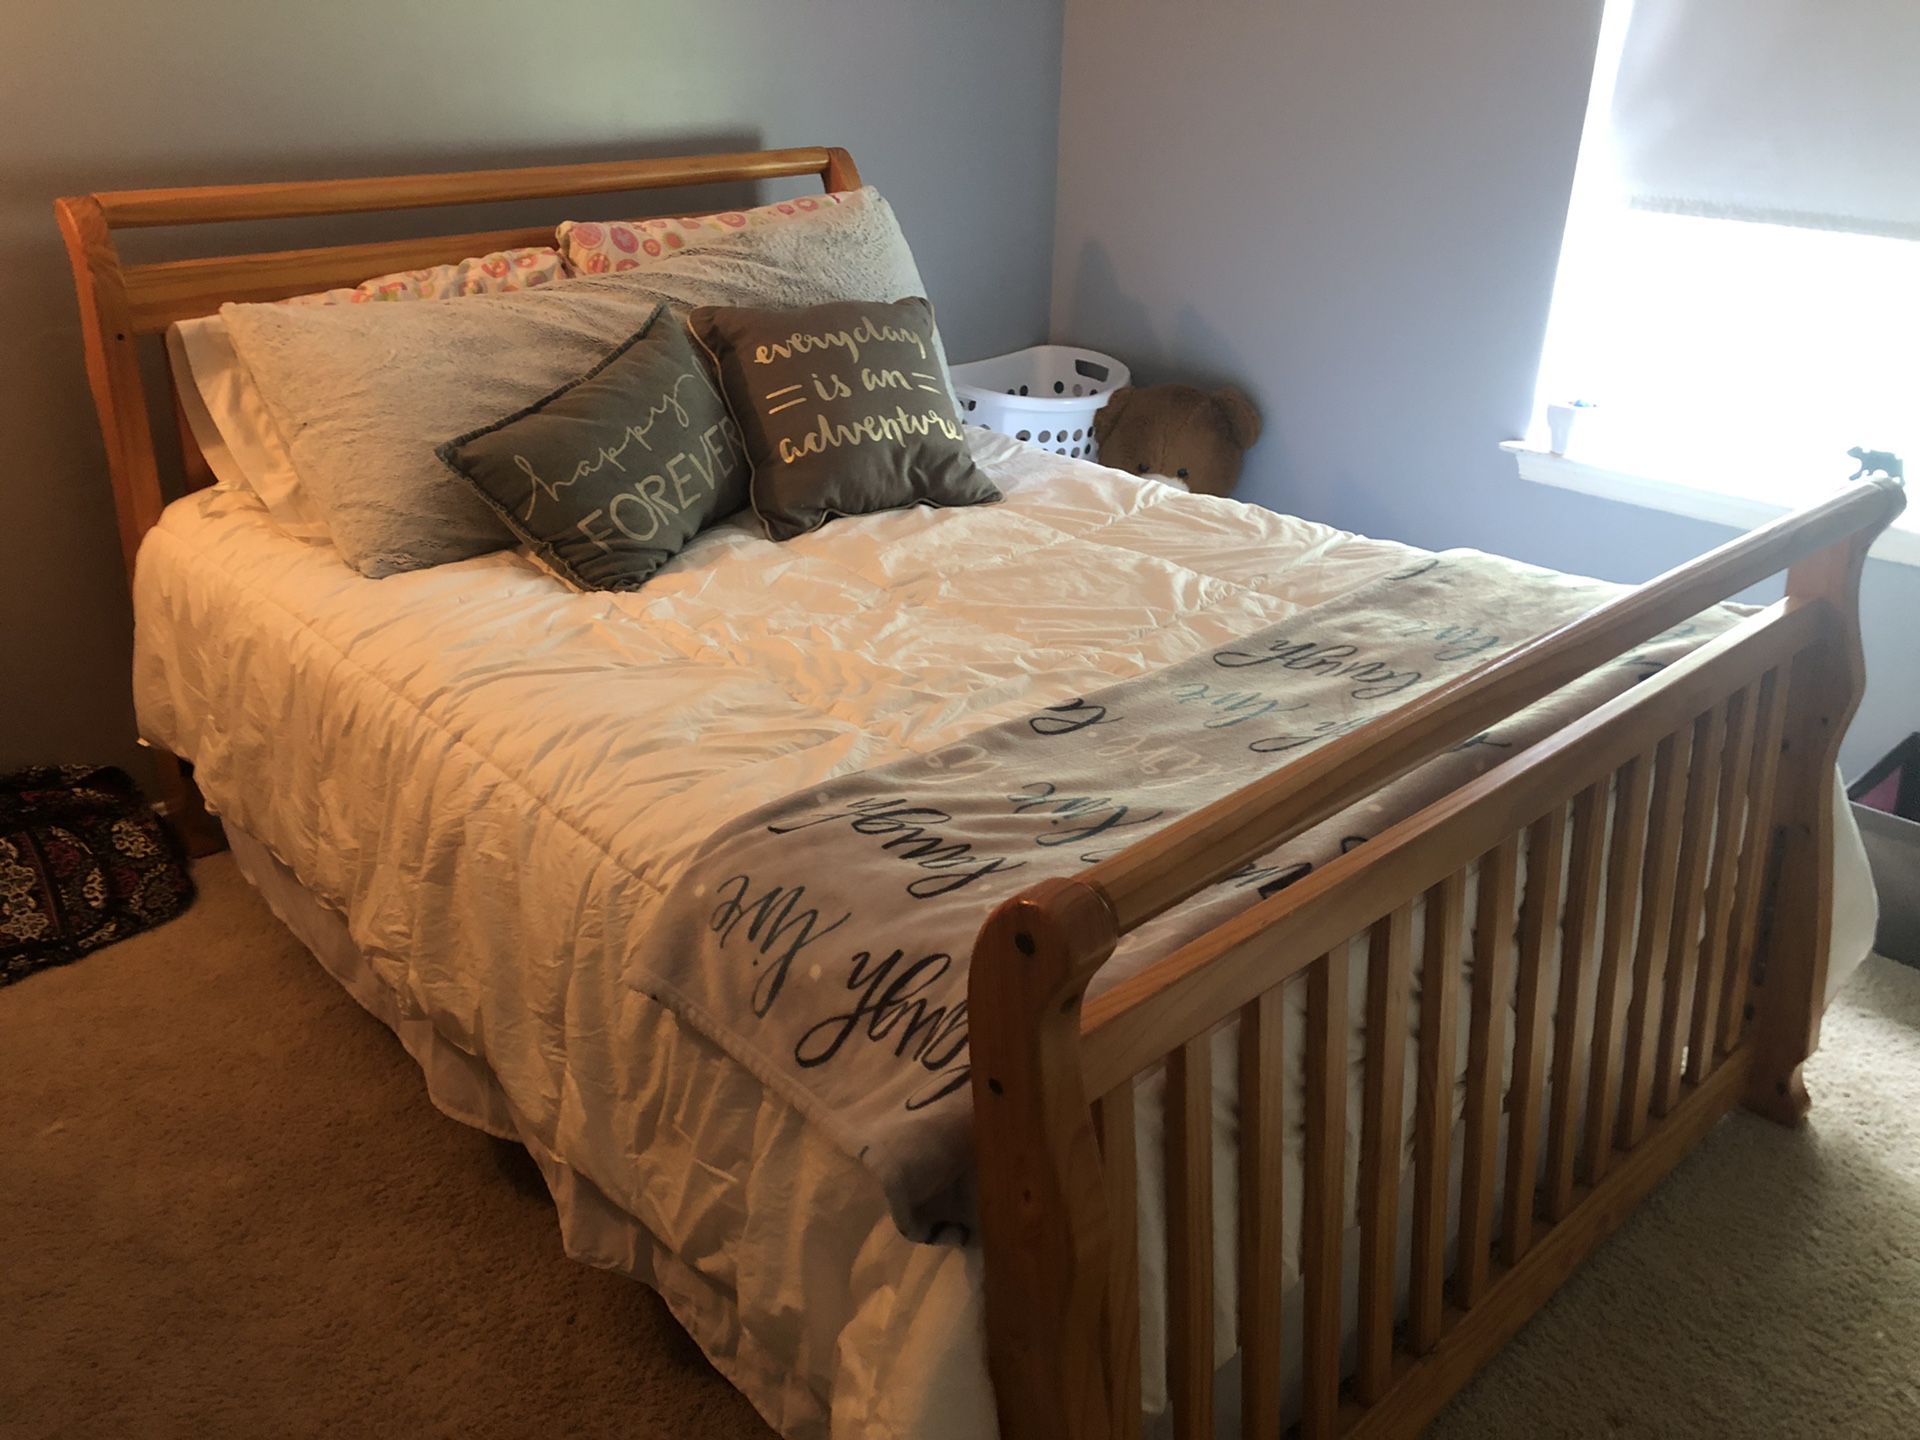 Full size bedroom furniture. Bed converts to crib